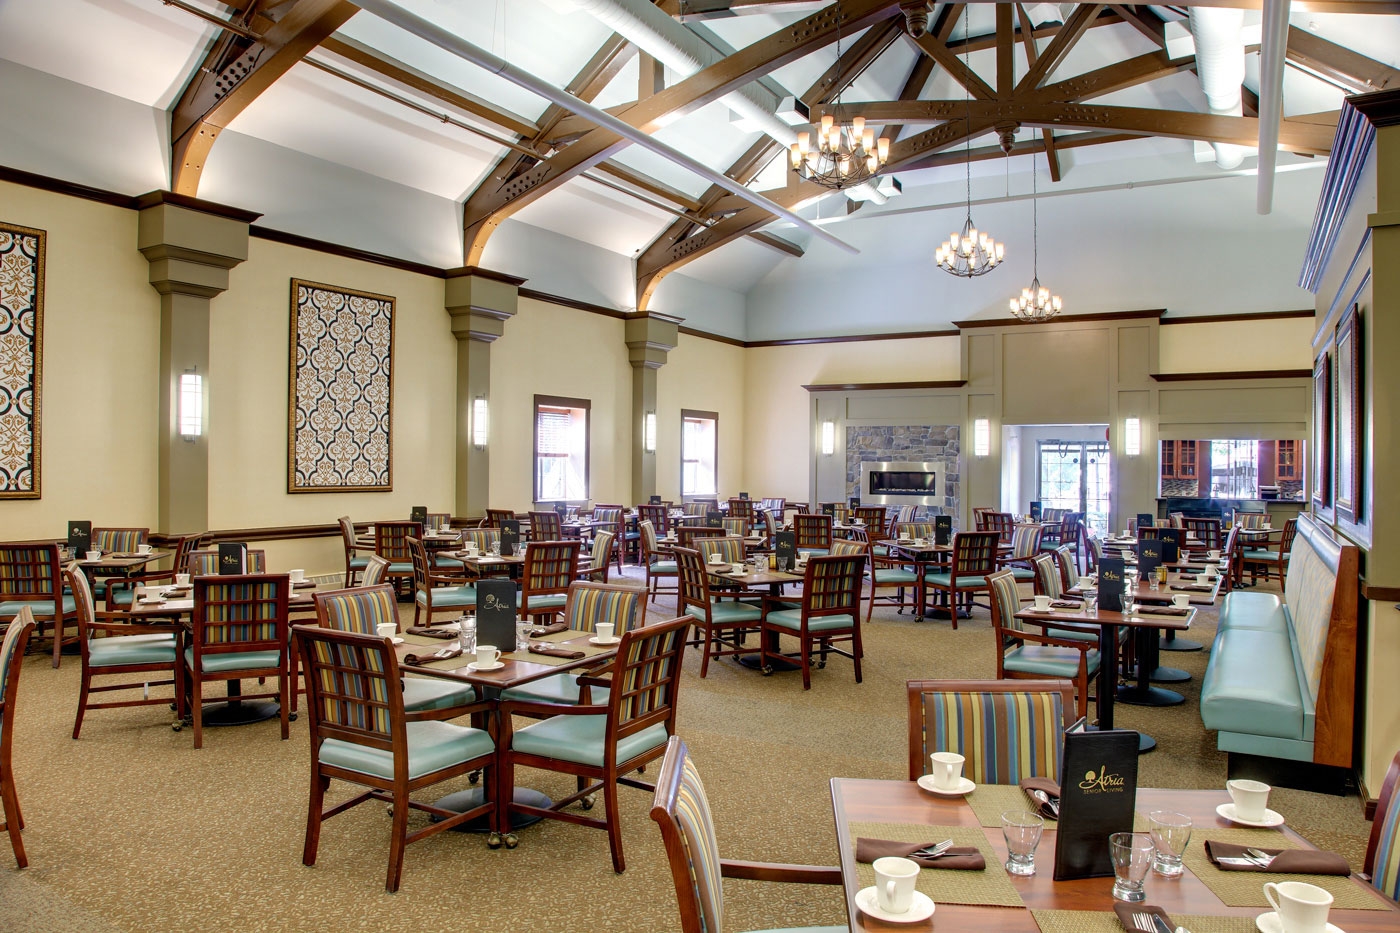 This dining room in a memory care community provides a bright and spacious area to gather.